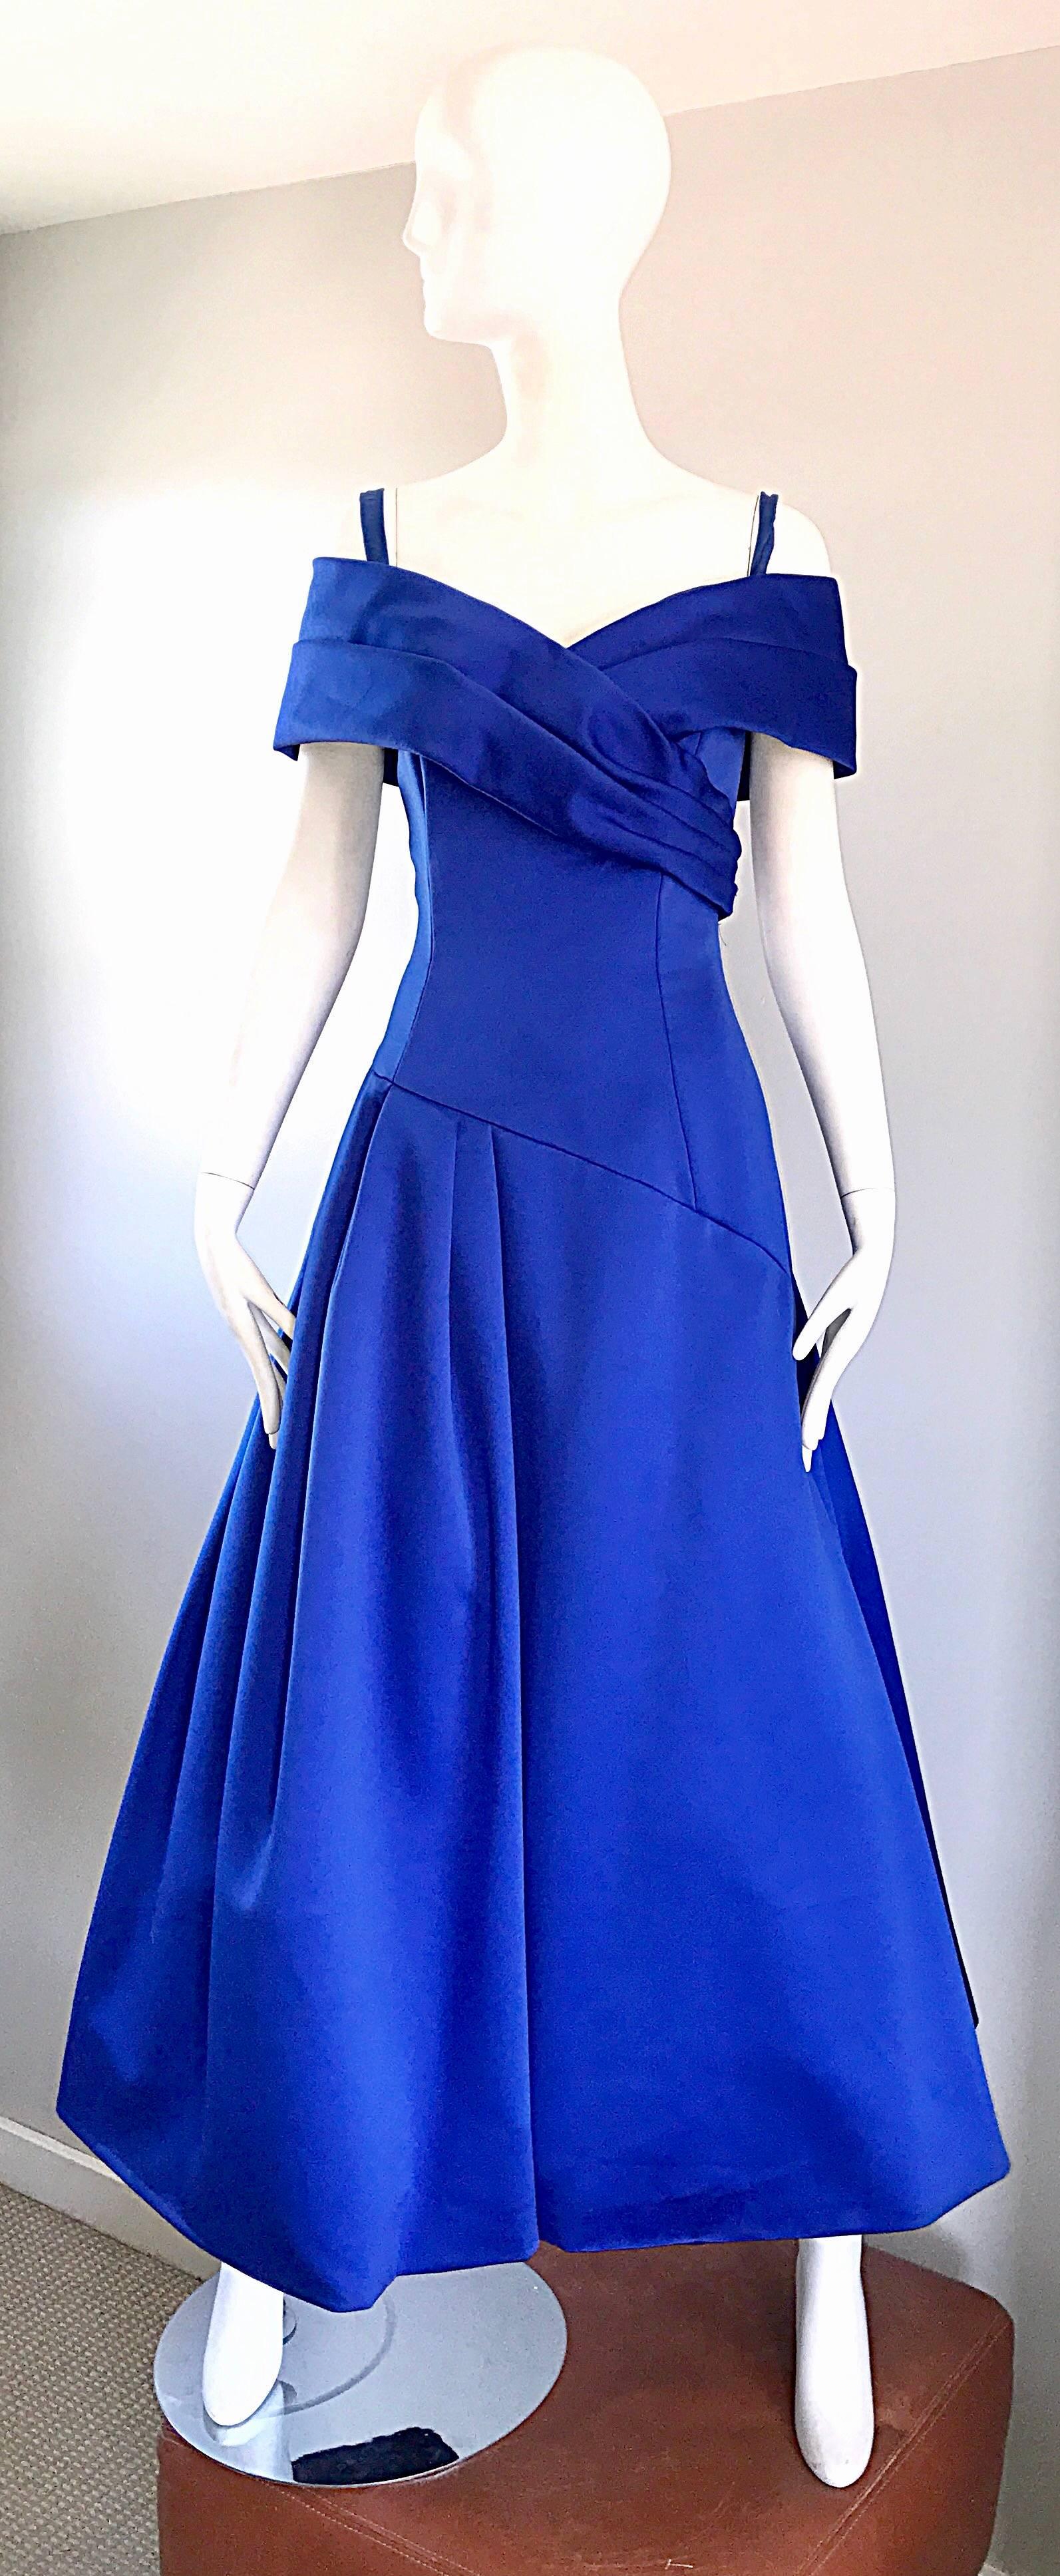 Gorgeous vintage 1980s / 80s VICTOR COSTA for SAKS 5th AVENUE royal blue silk evening dress! Features a cold shoulder / off-the-shoulder bodice, with a beautifully constructed full skirt. Built in crinoline for extra volume. Elastic straps at the